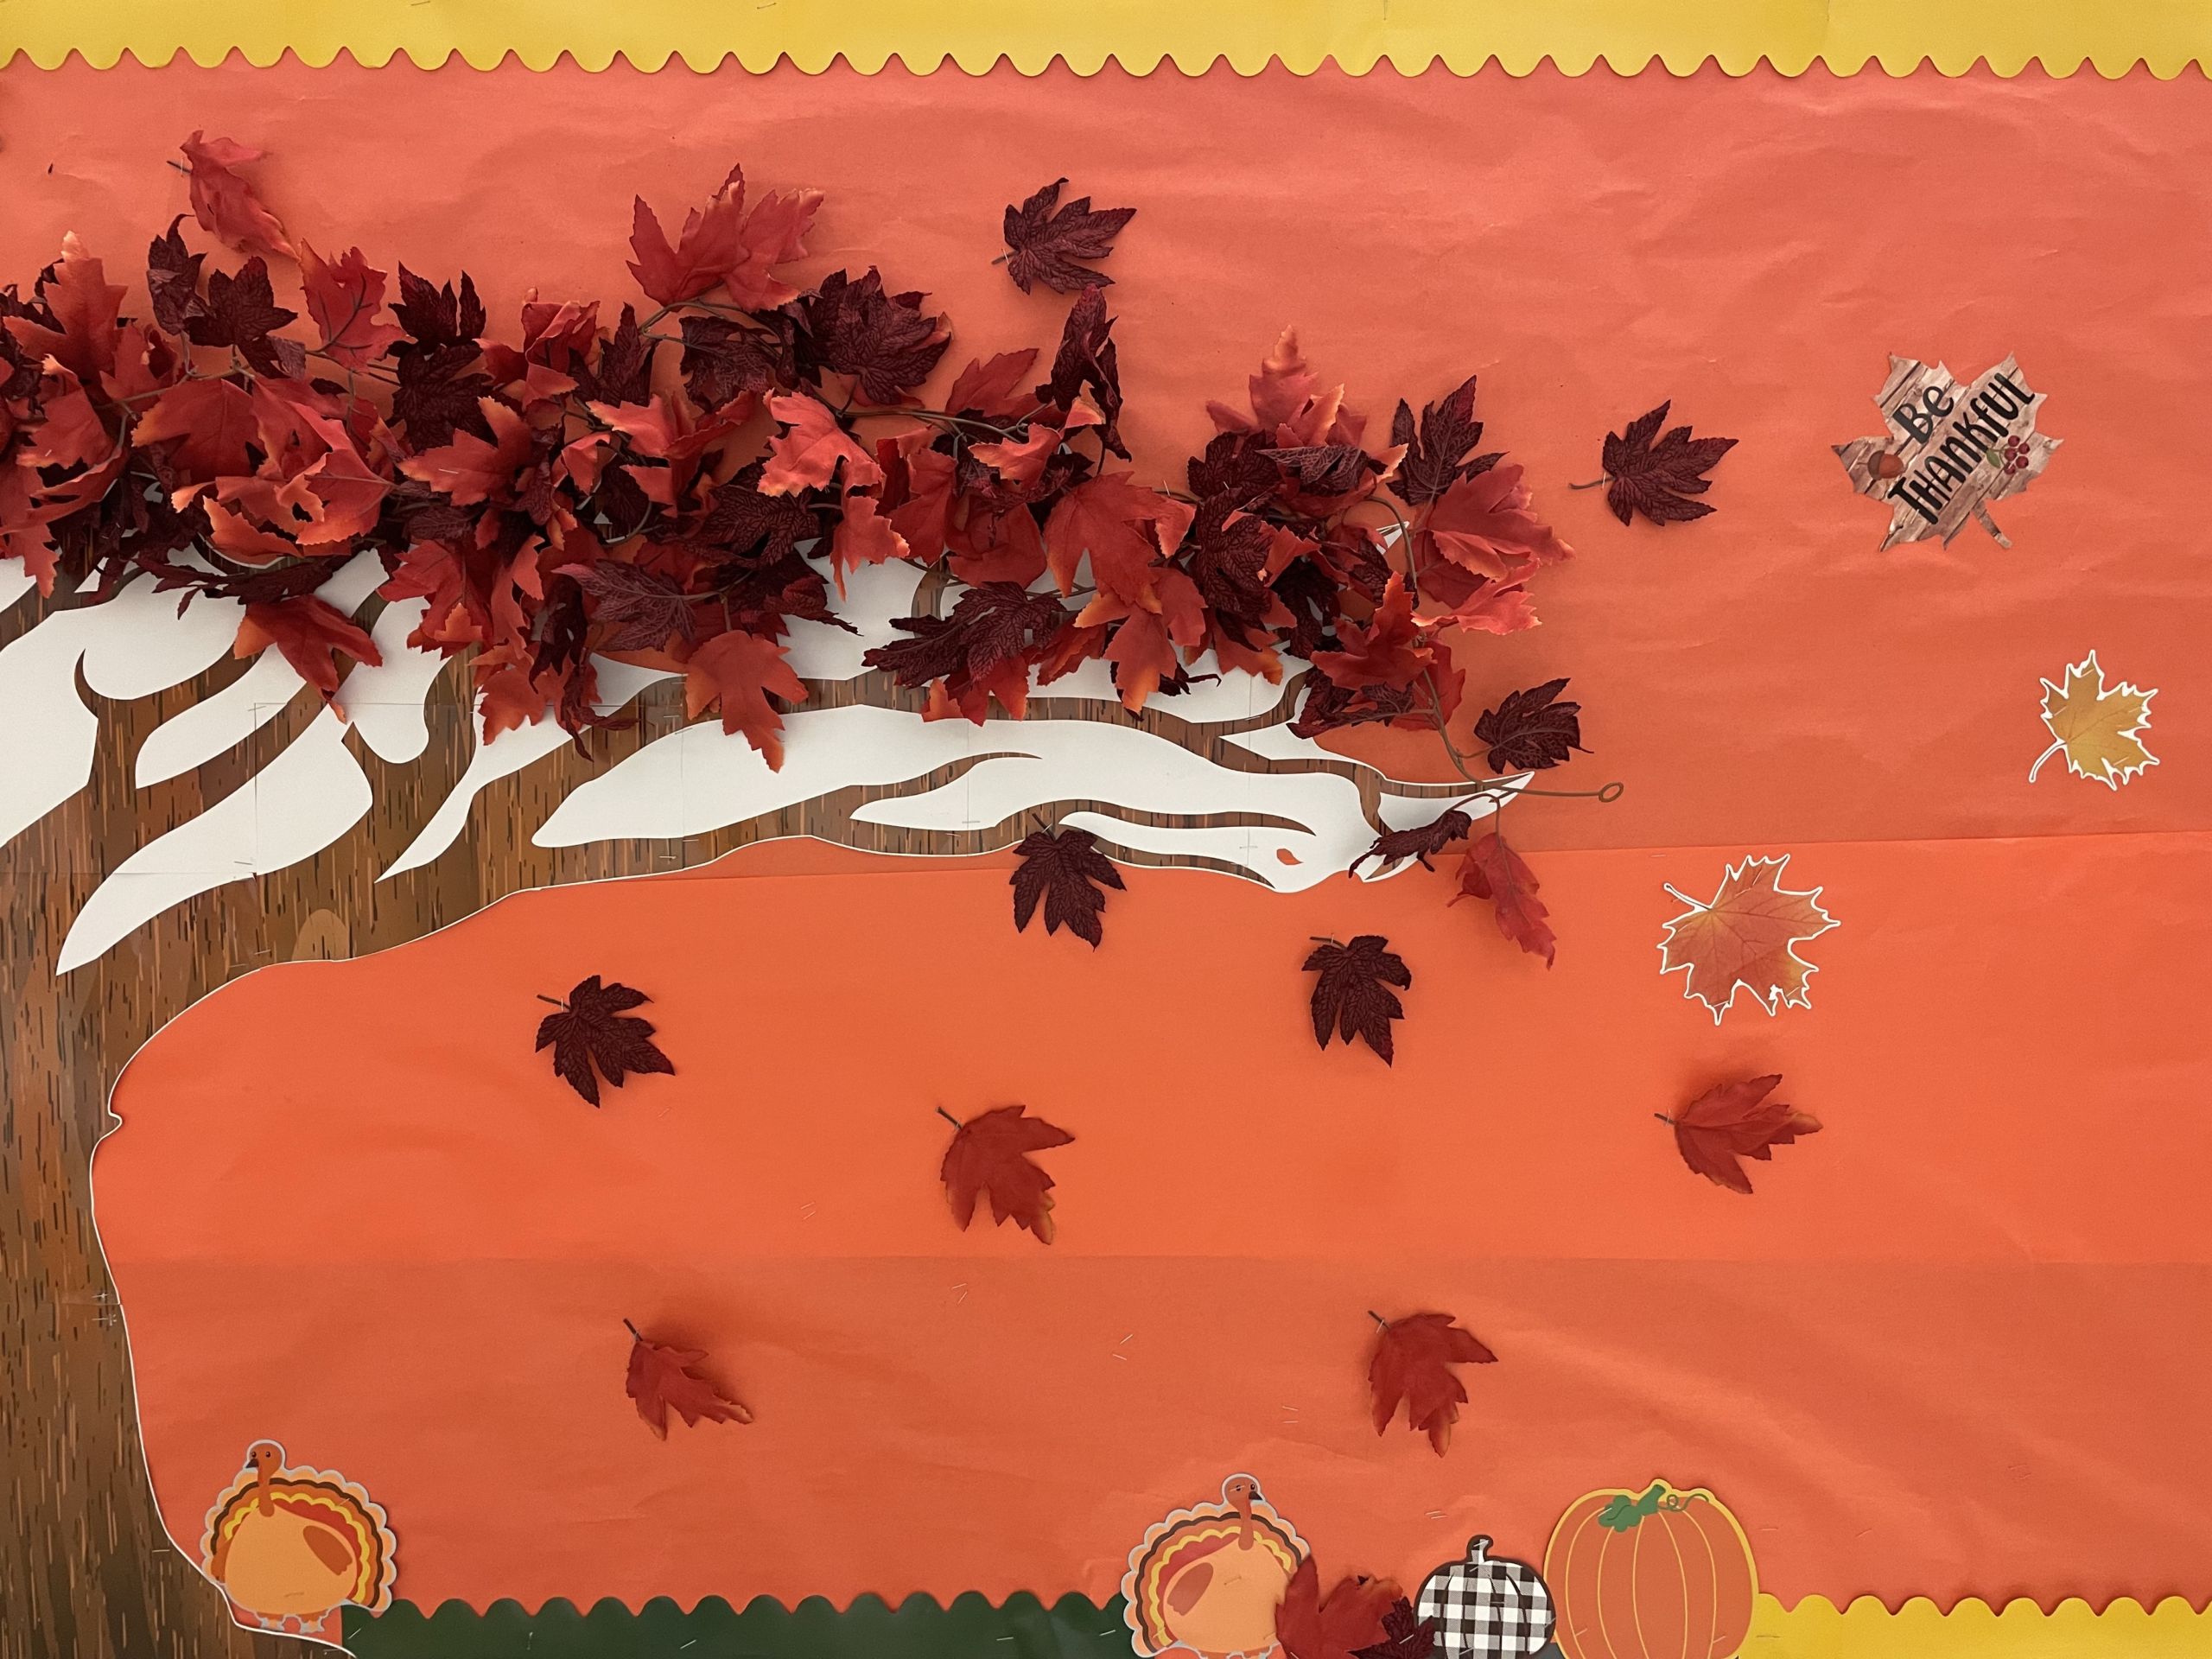 Image shows a bright orange bulletin board with a paper tree on it with colorful falling leaves.